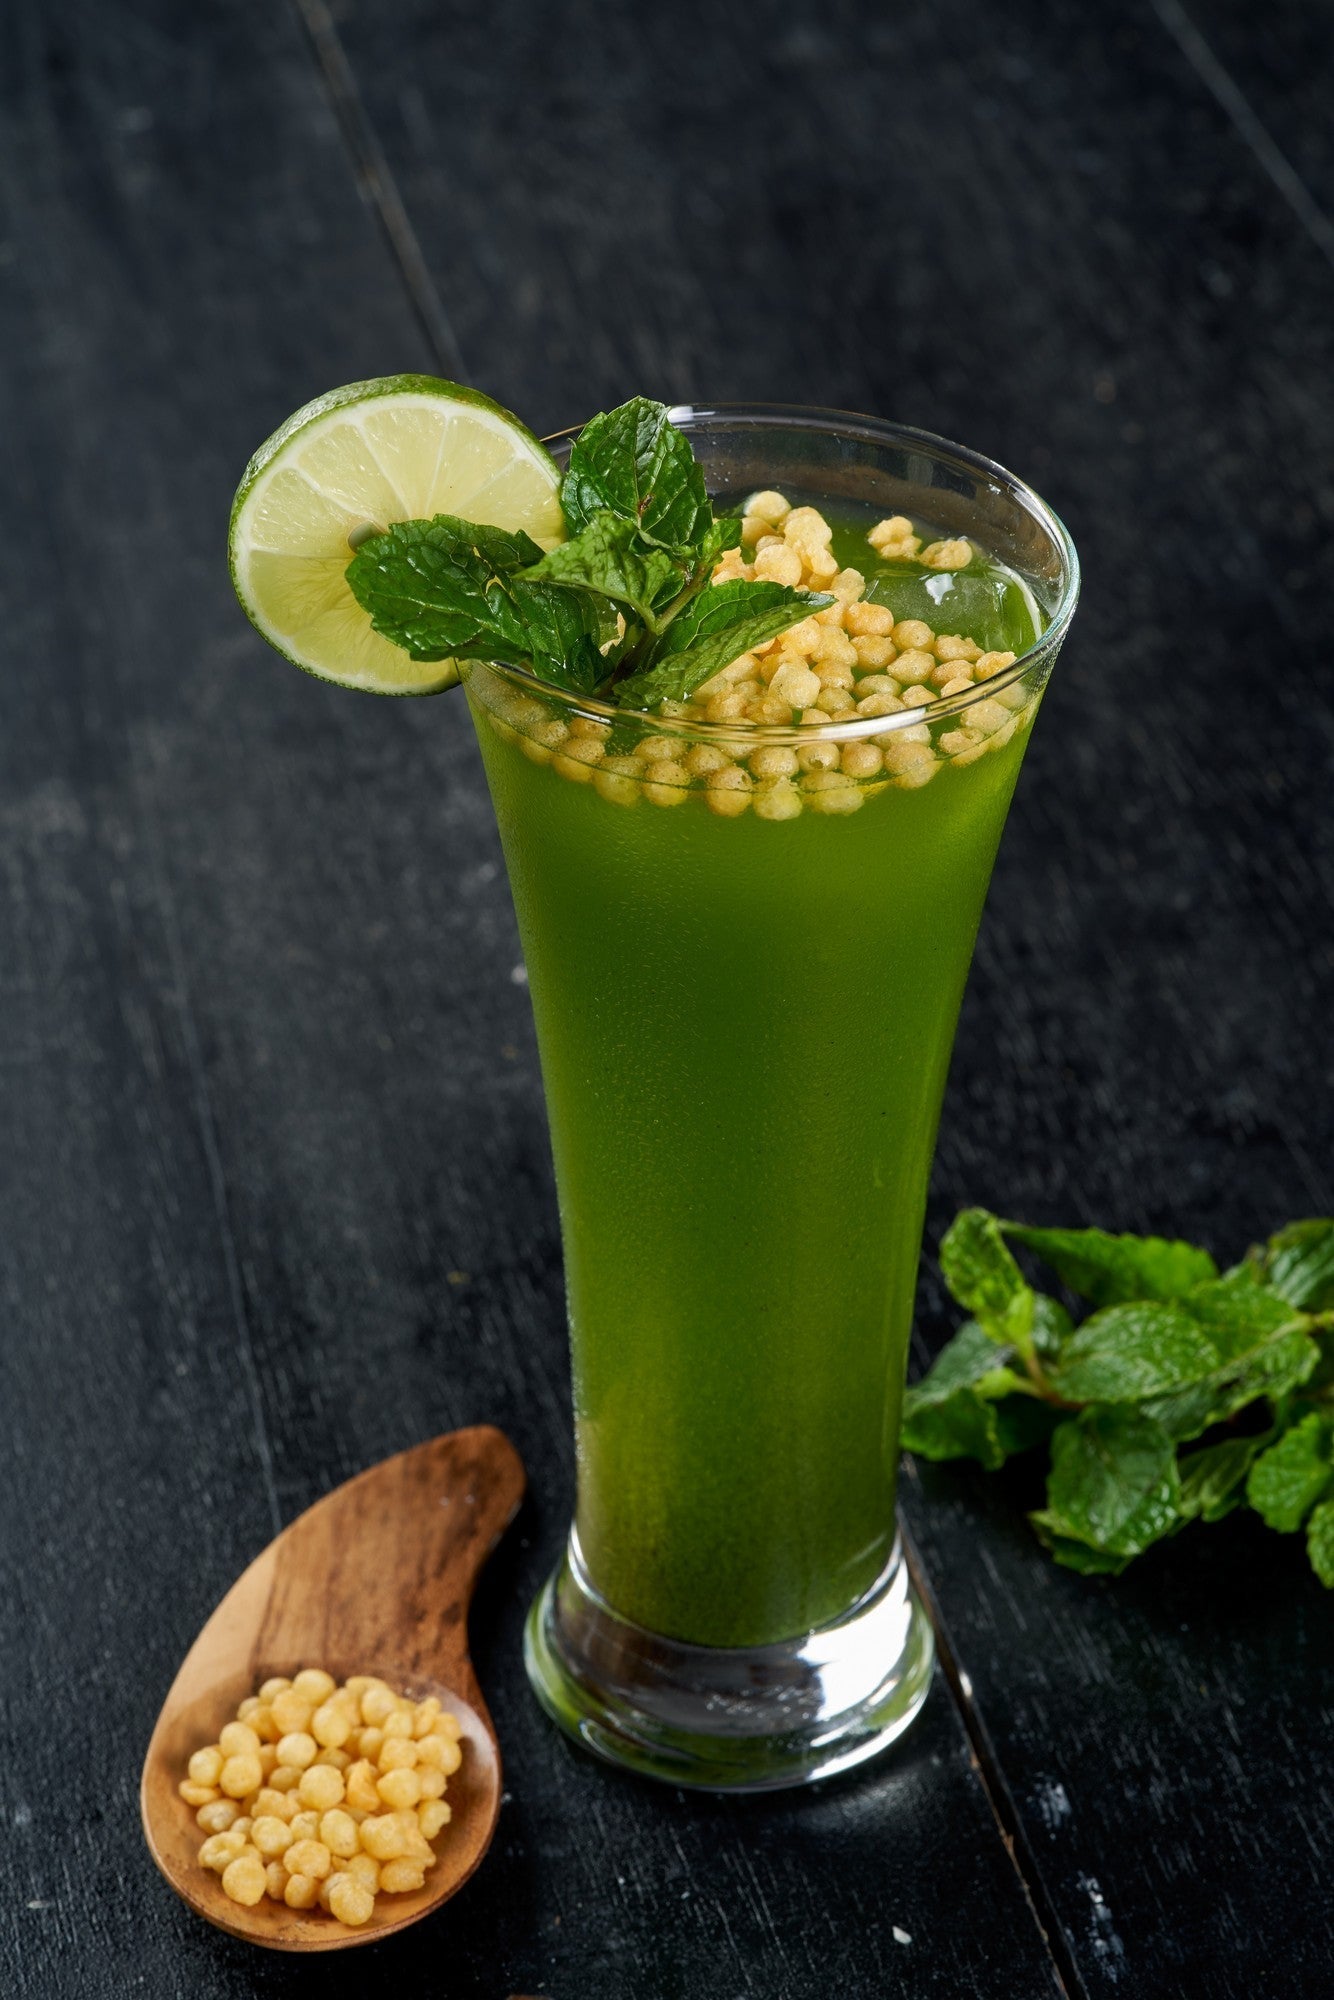 Refreshing Jaljeera, a tangy and spicy Indian drink made with cumin, mint, and lemon, a perfect summer cooler at Ganesha Ek Sanskriti